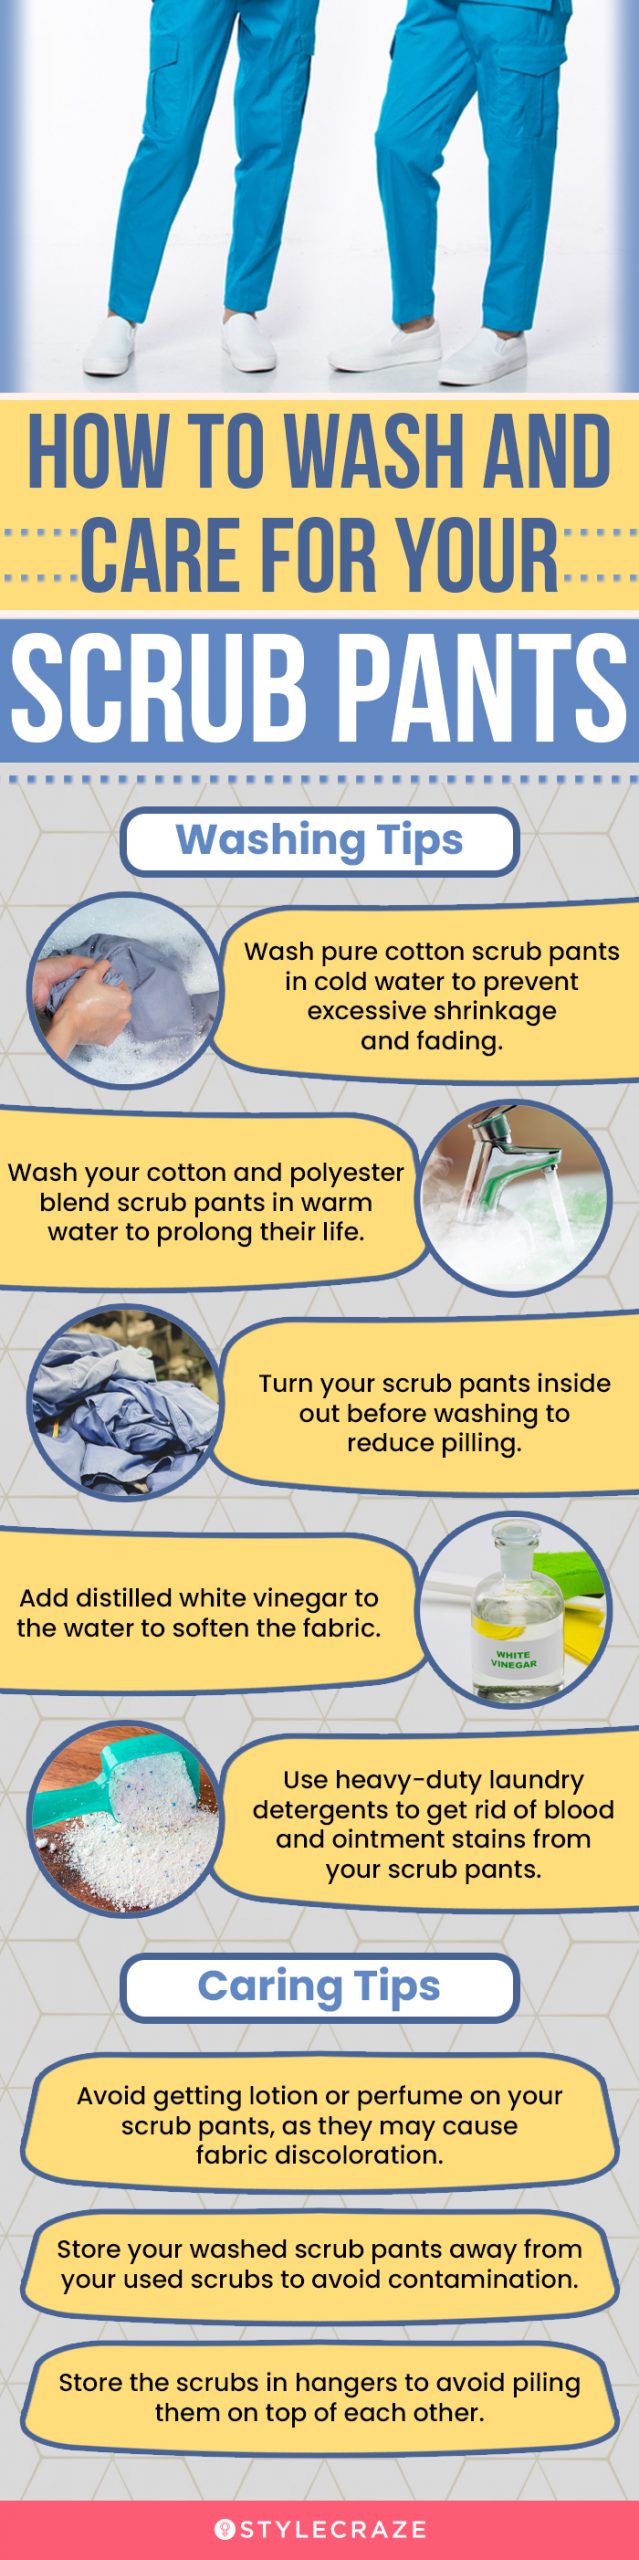 How To Wash And Care For Your Scrub Pants (infographic)